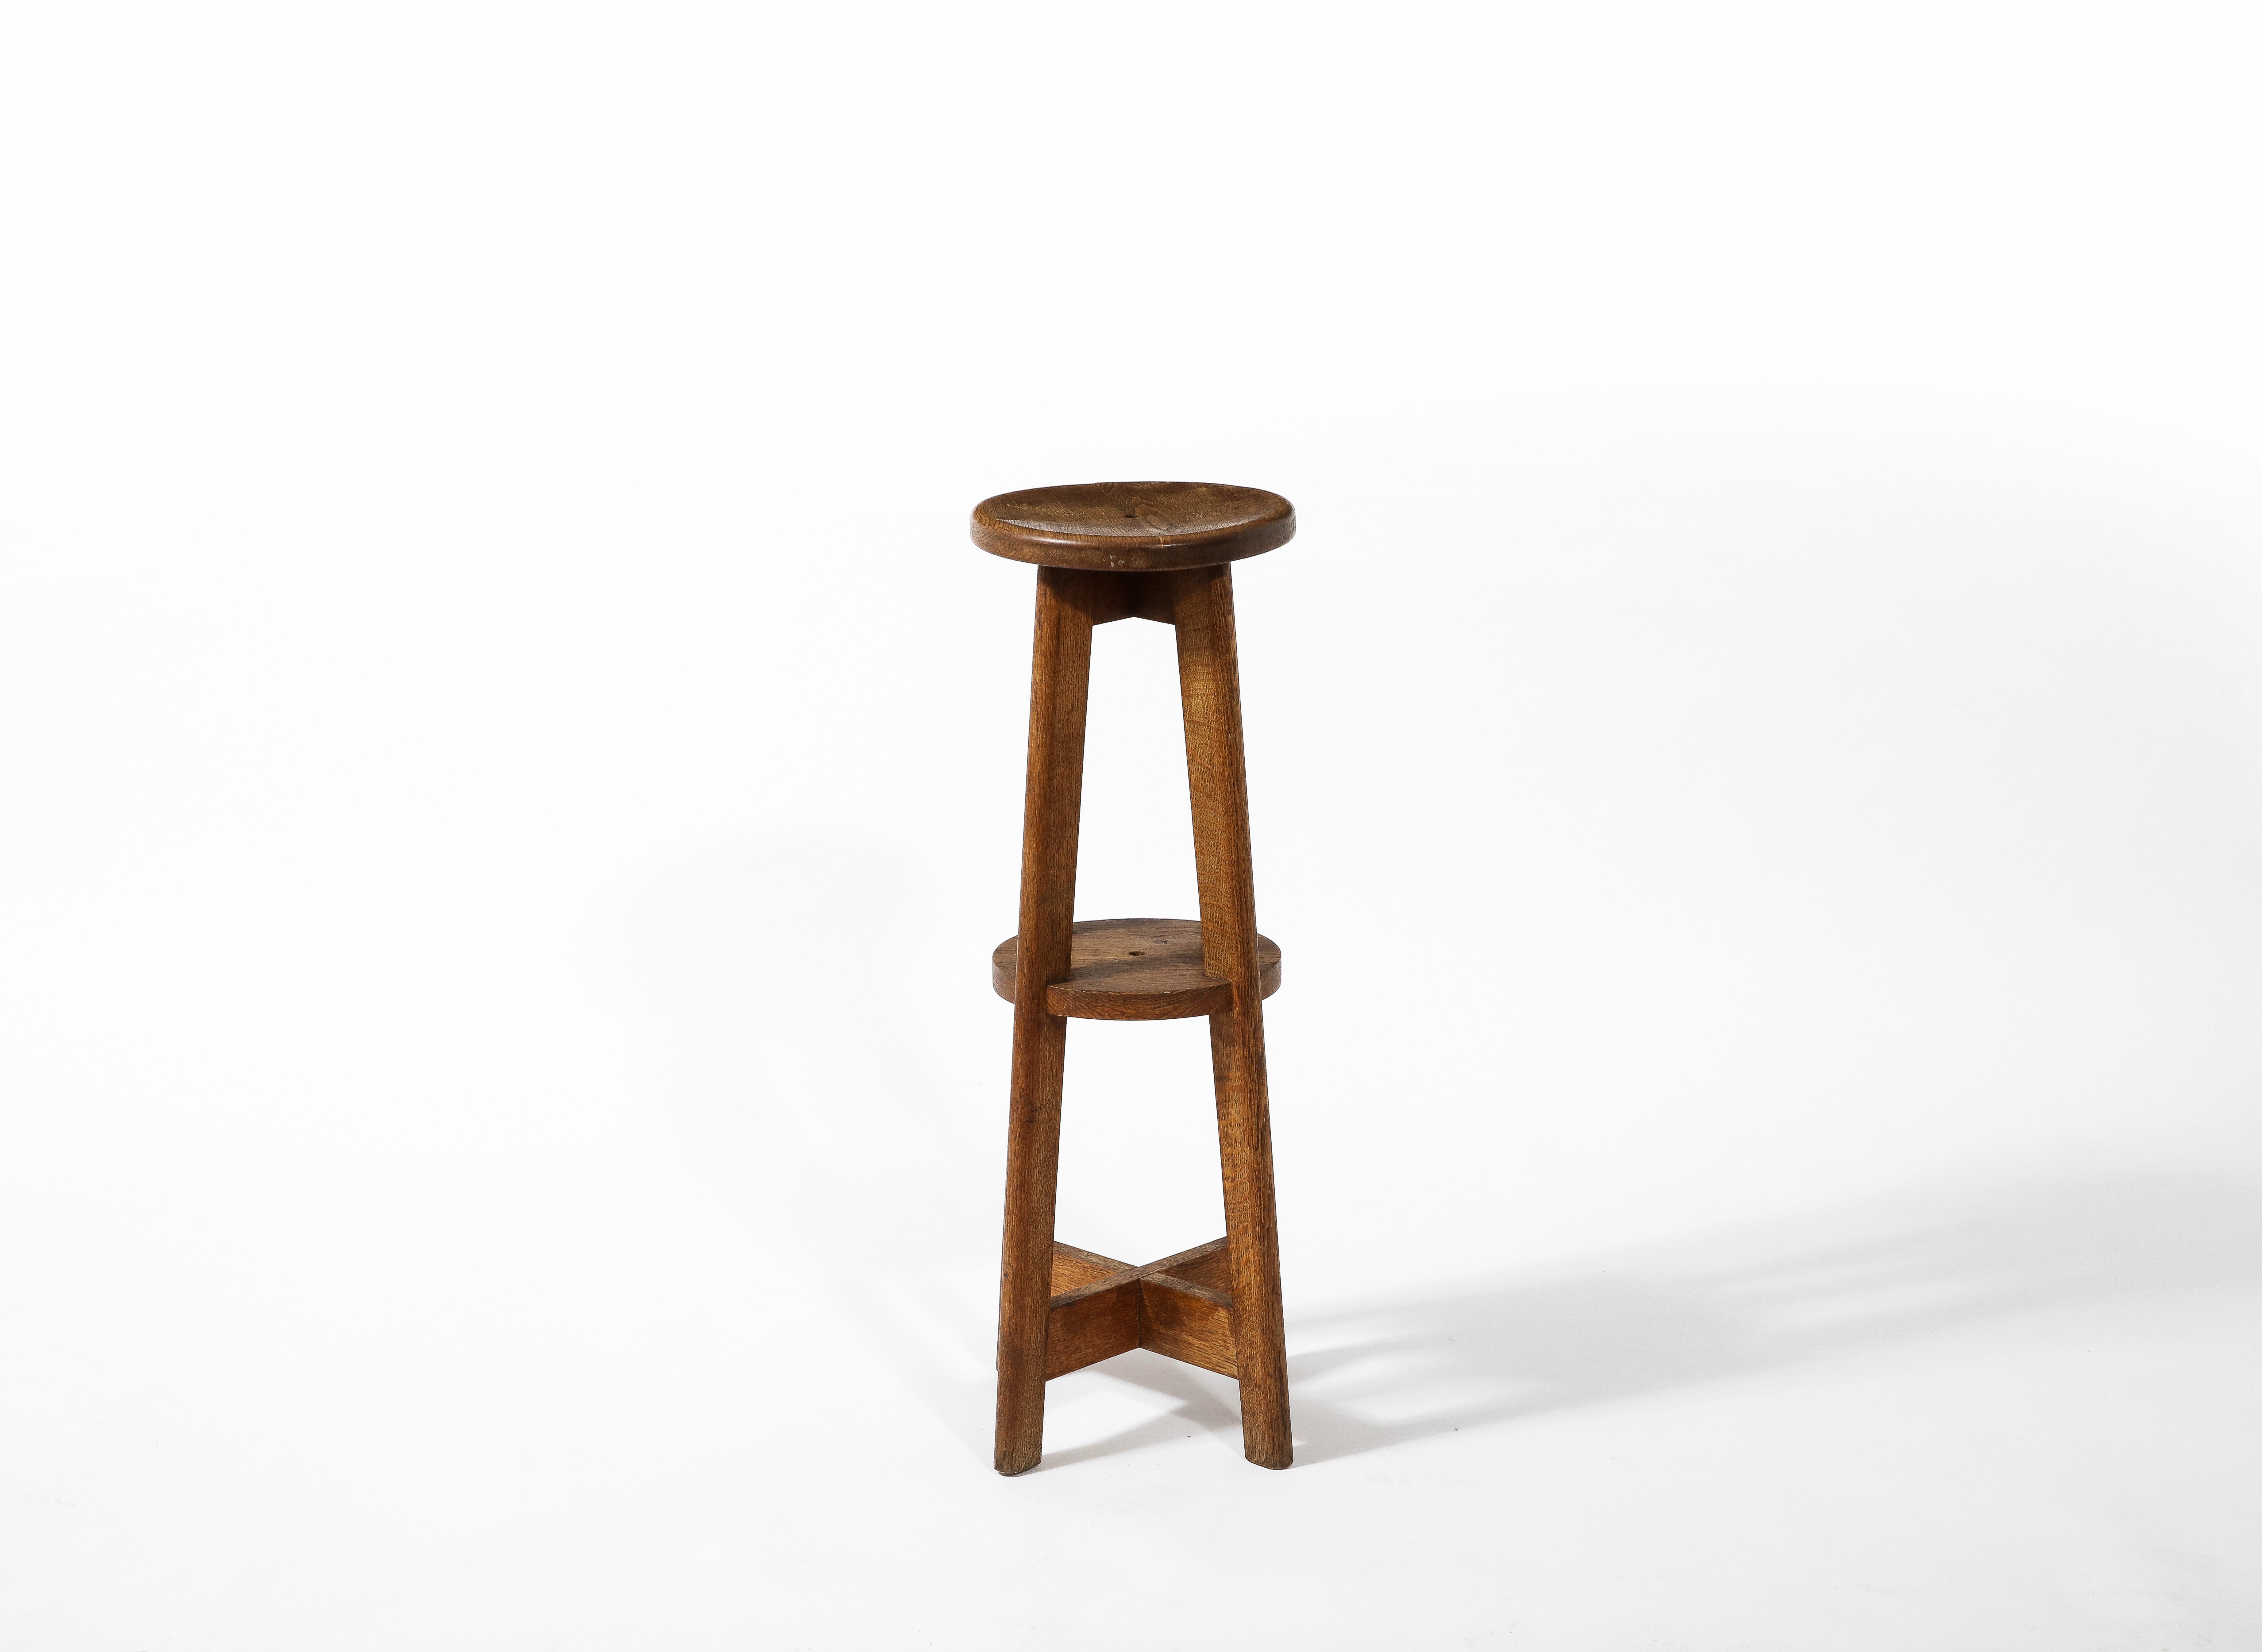 Tall Rustic Farm Stool or Pedestal in Solid Oak, France 1950's For Sale 3